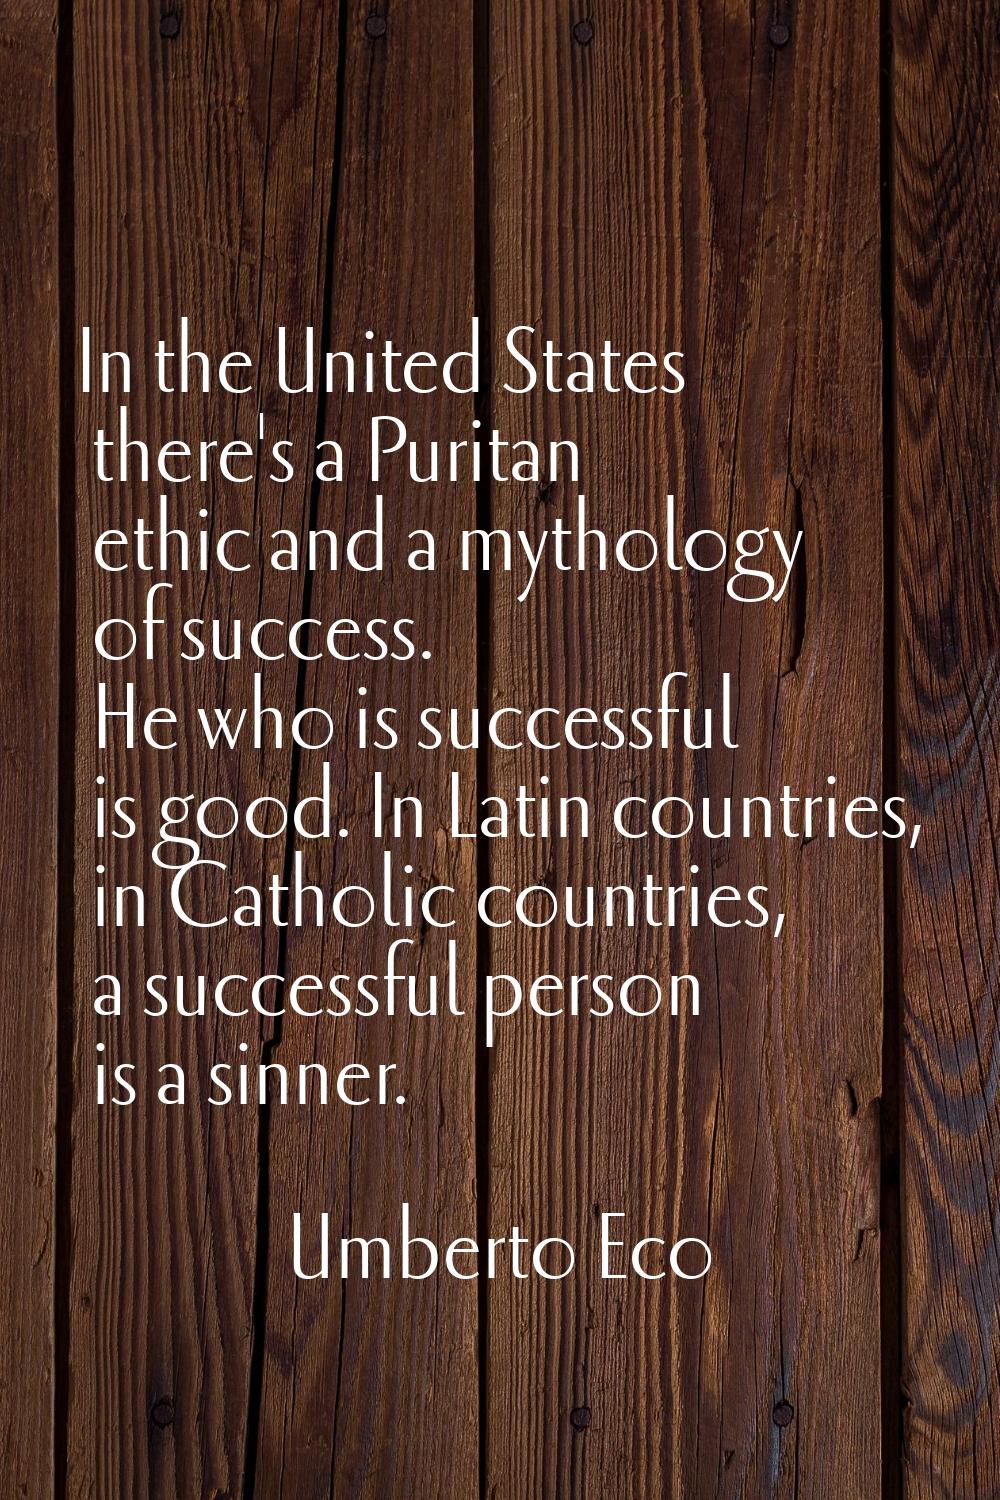 In the United States there's a Puritan ethic and a mythology of success. He who is successful is go